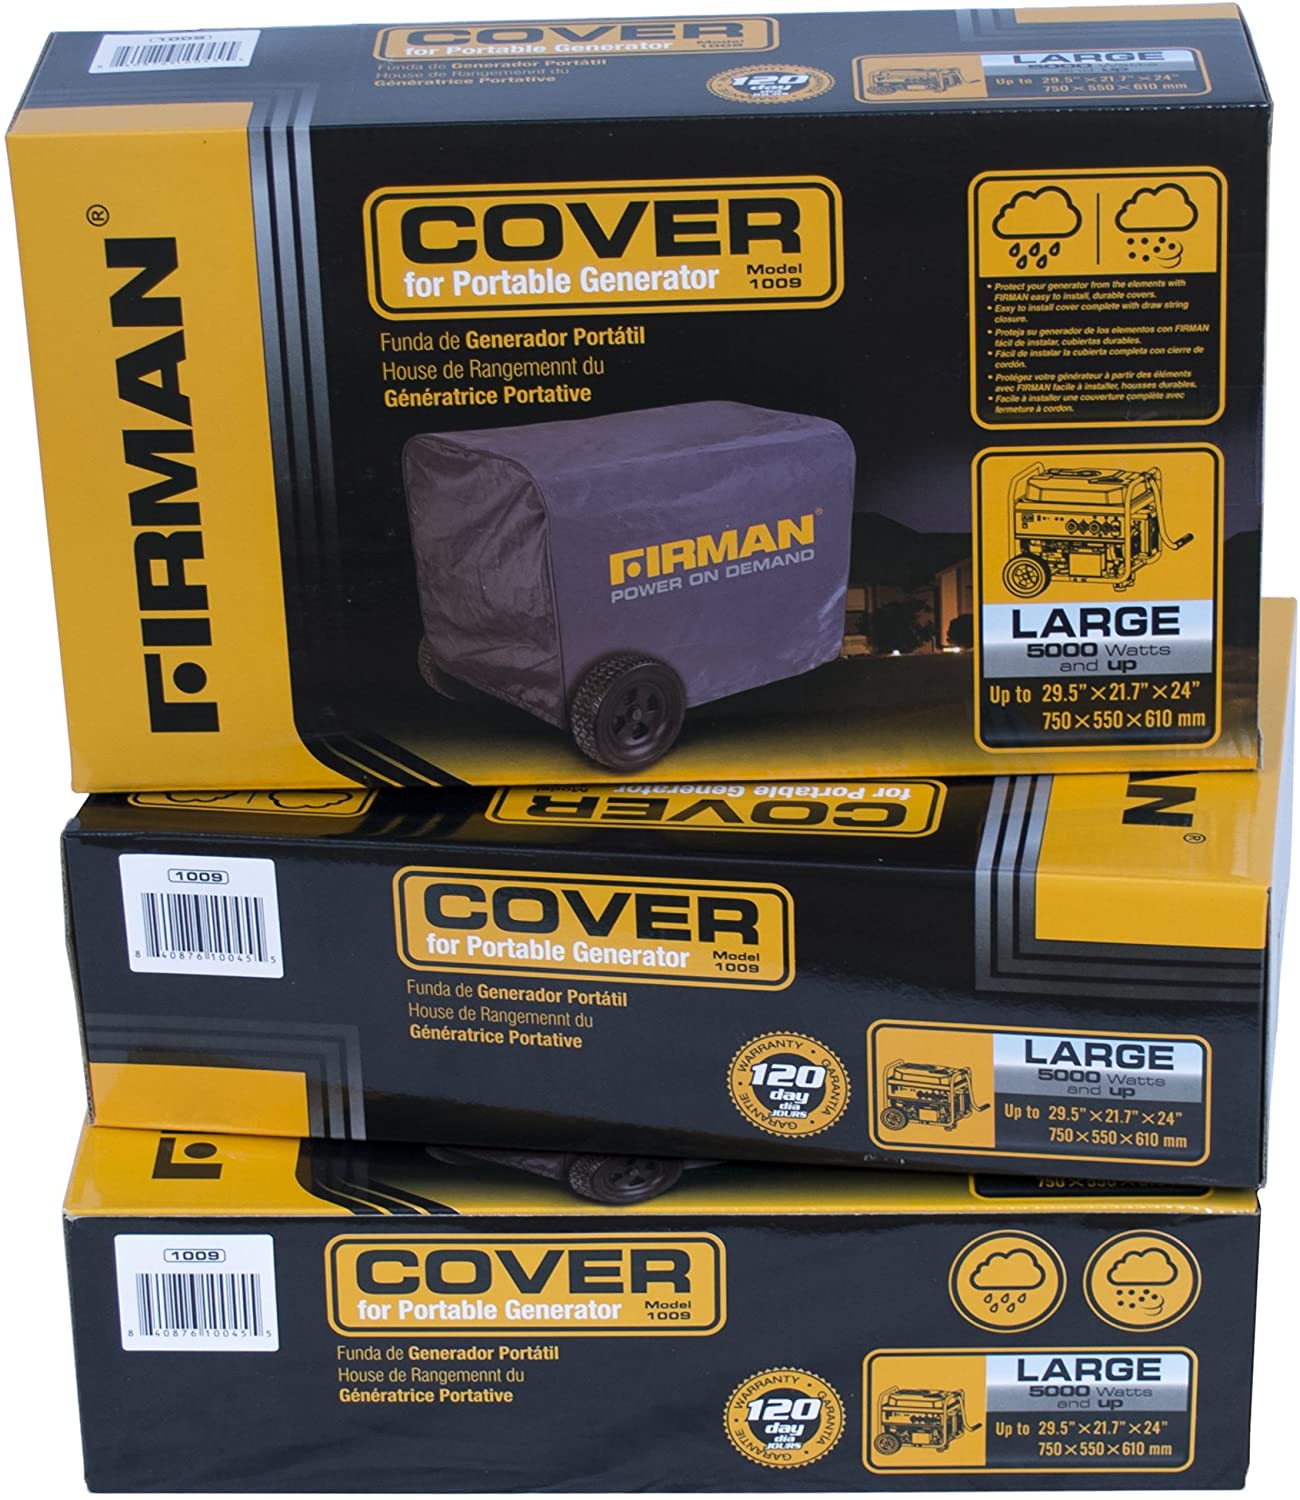 Firman, Firman 1009 Cover For Portable Generators Over 5500W New